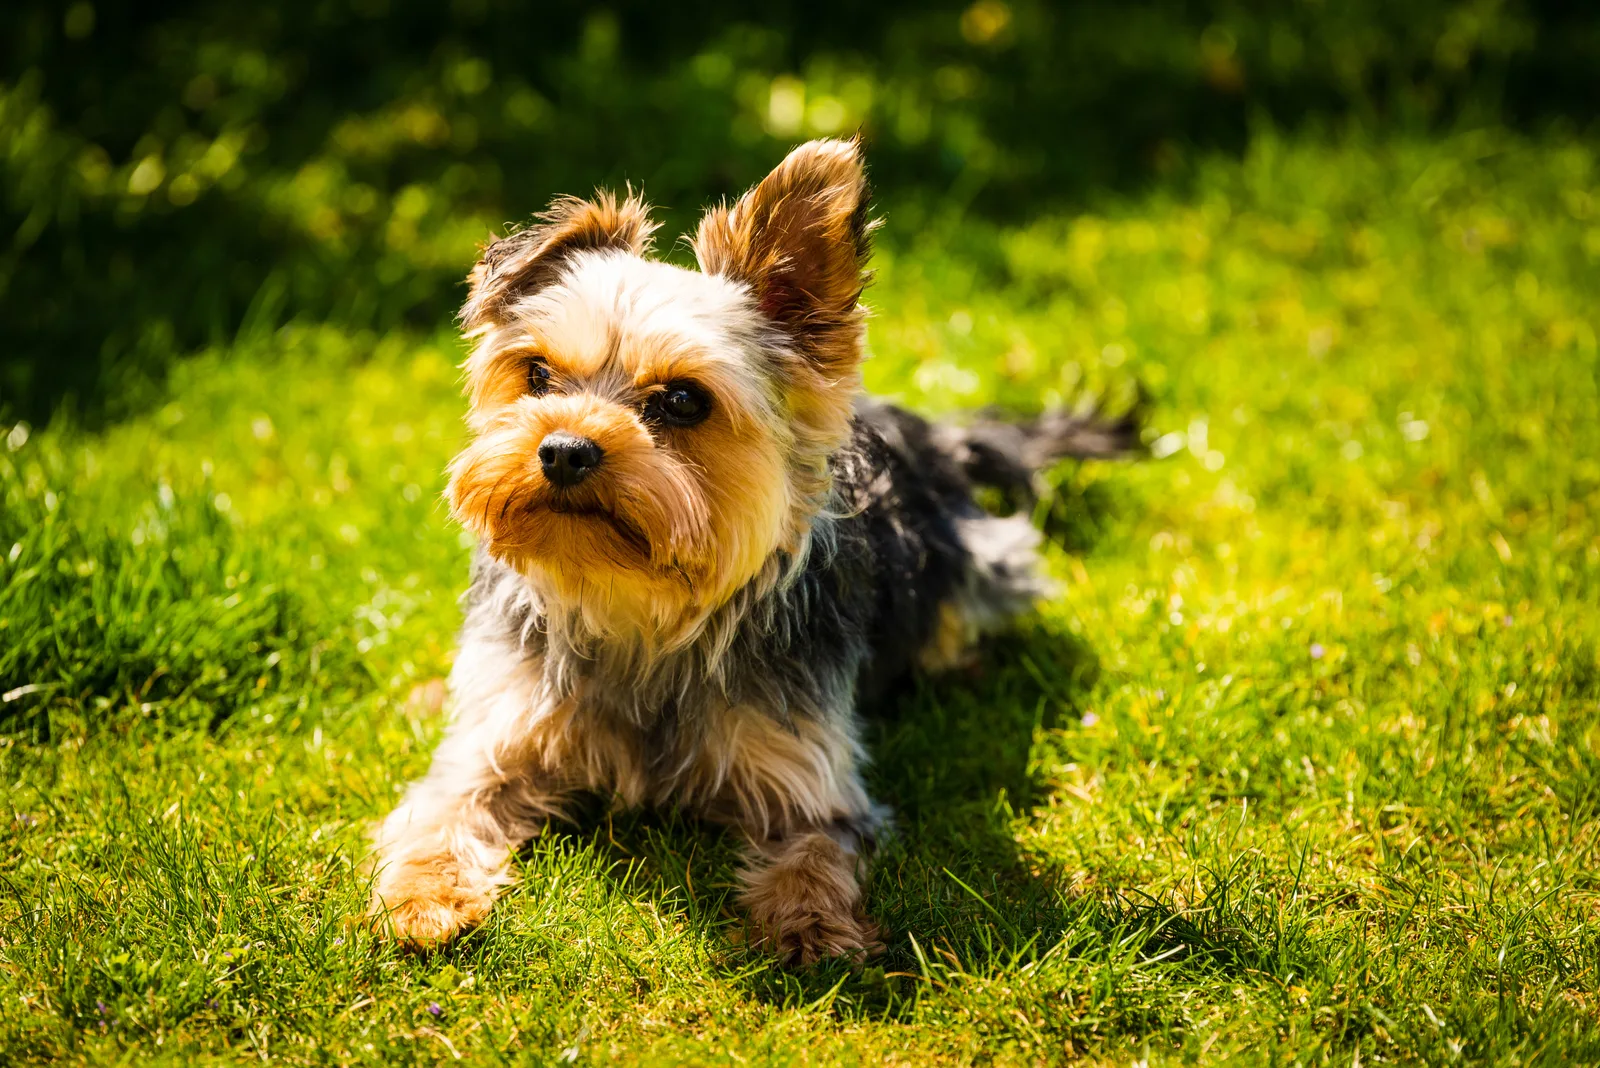 The Yorkshire Terrier lies on the grass